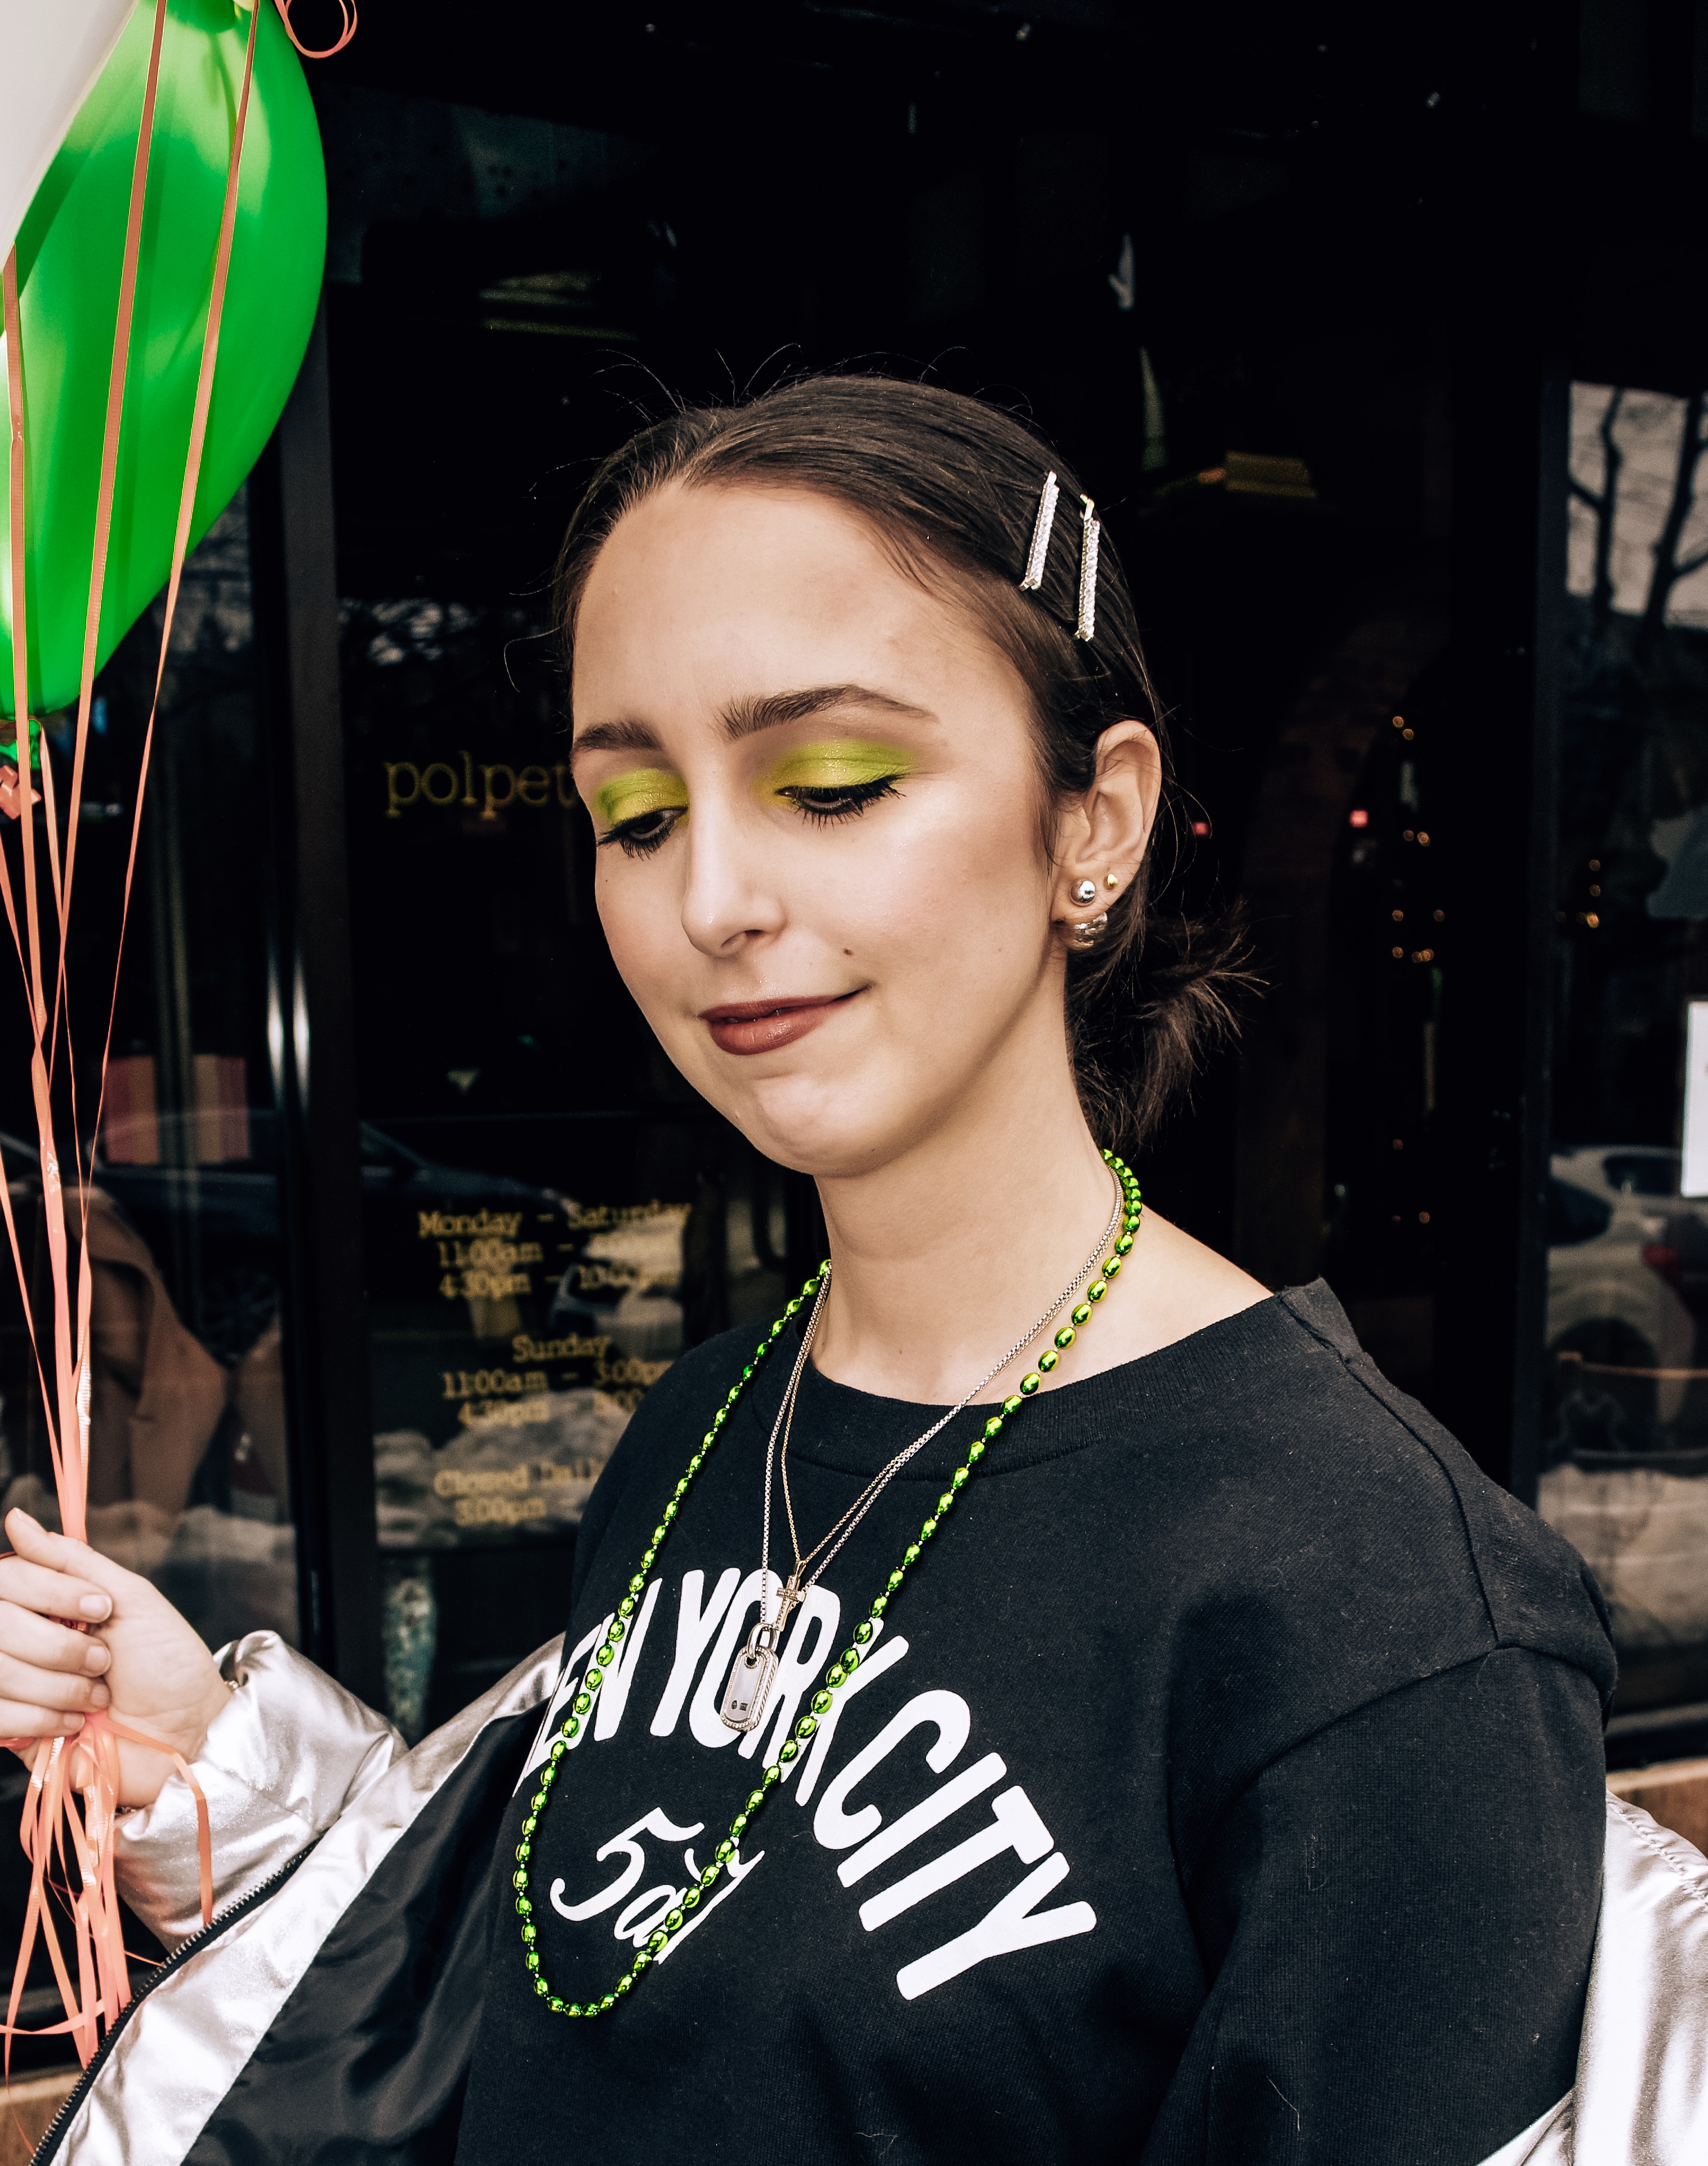 Simply by Simone-Makeup-St. Patrick's Day-Green Eyeshadow-Festive-Accessories-Bobby Pins #accessories #makeup #stpatricksday #greeneyeshadow #crystalbobbypins #springstyle #springfashion #springmakeup #makeup #westchester 